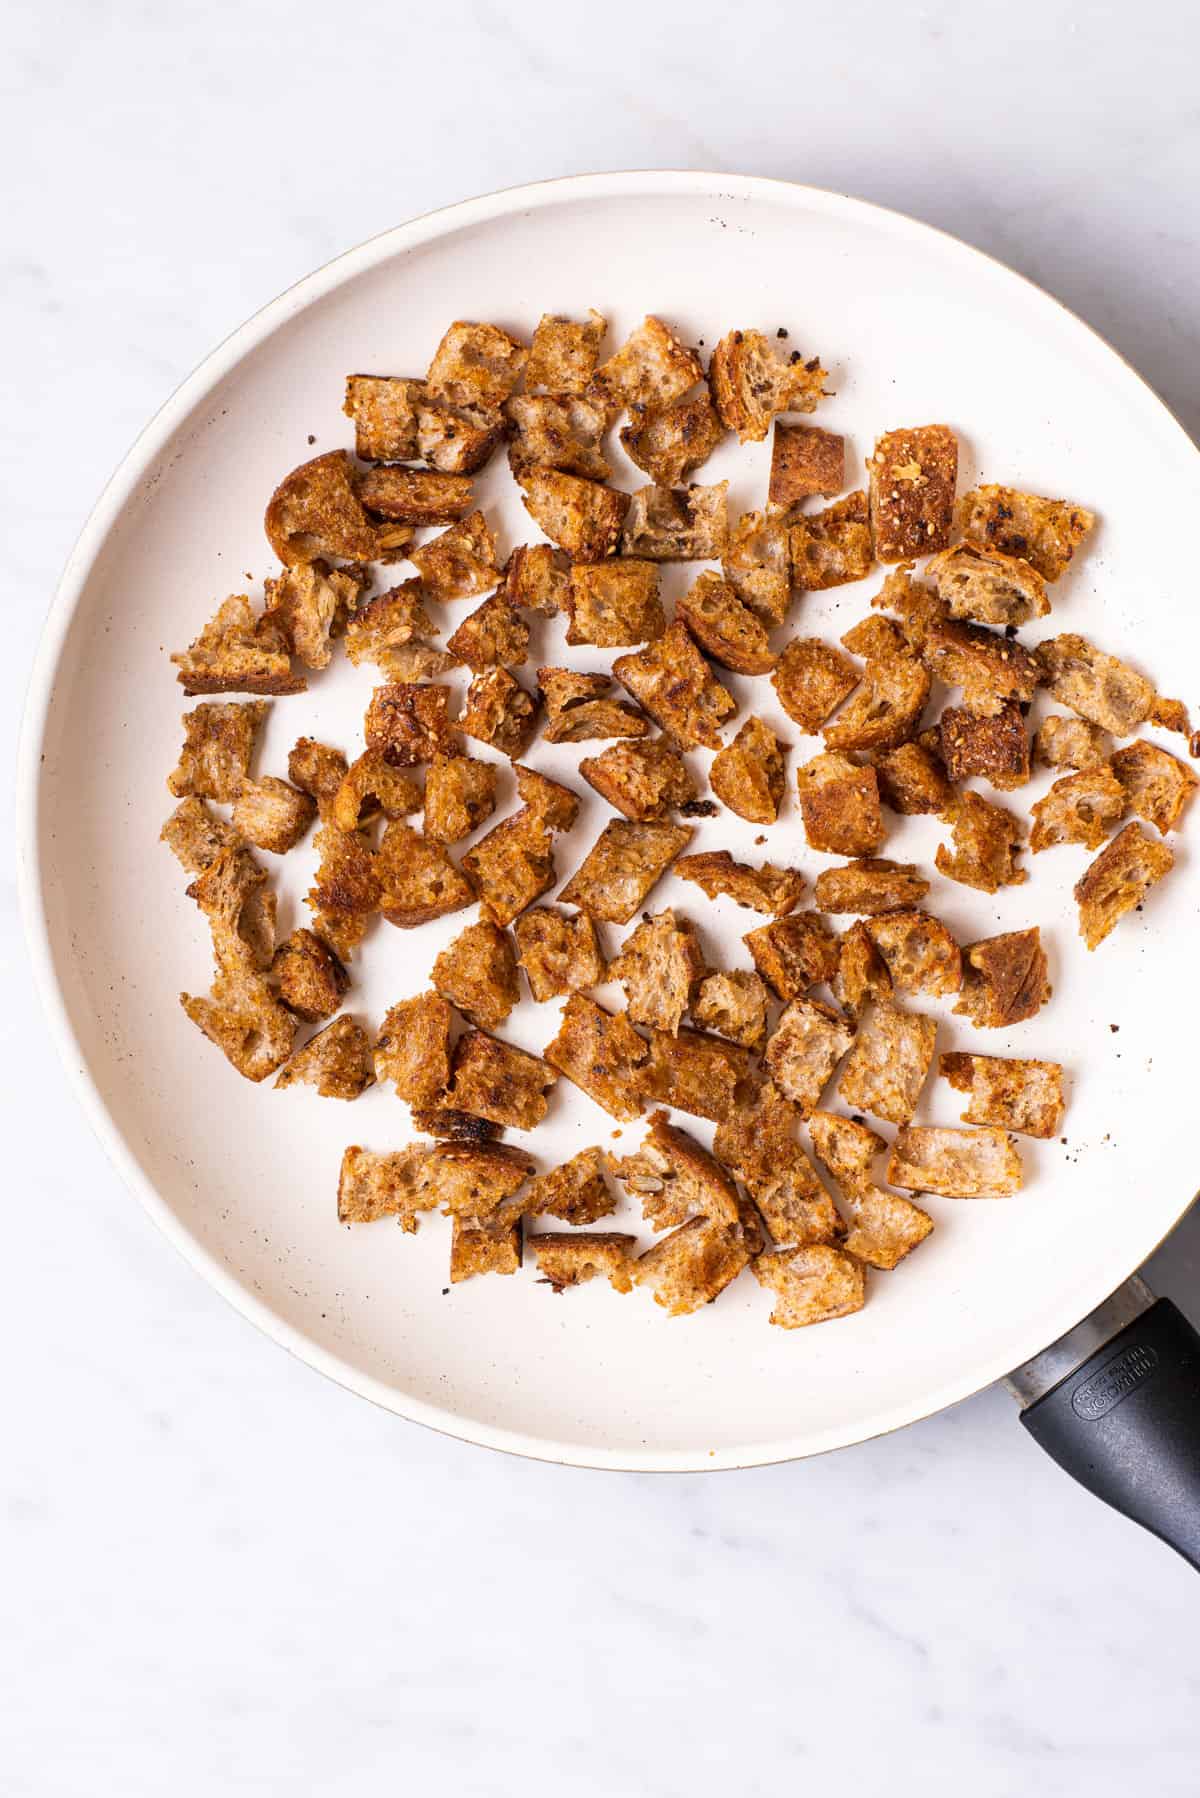 Homemade rustic croutons in a white skillet.